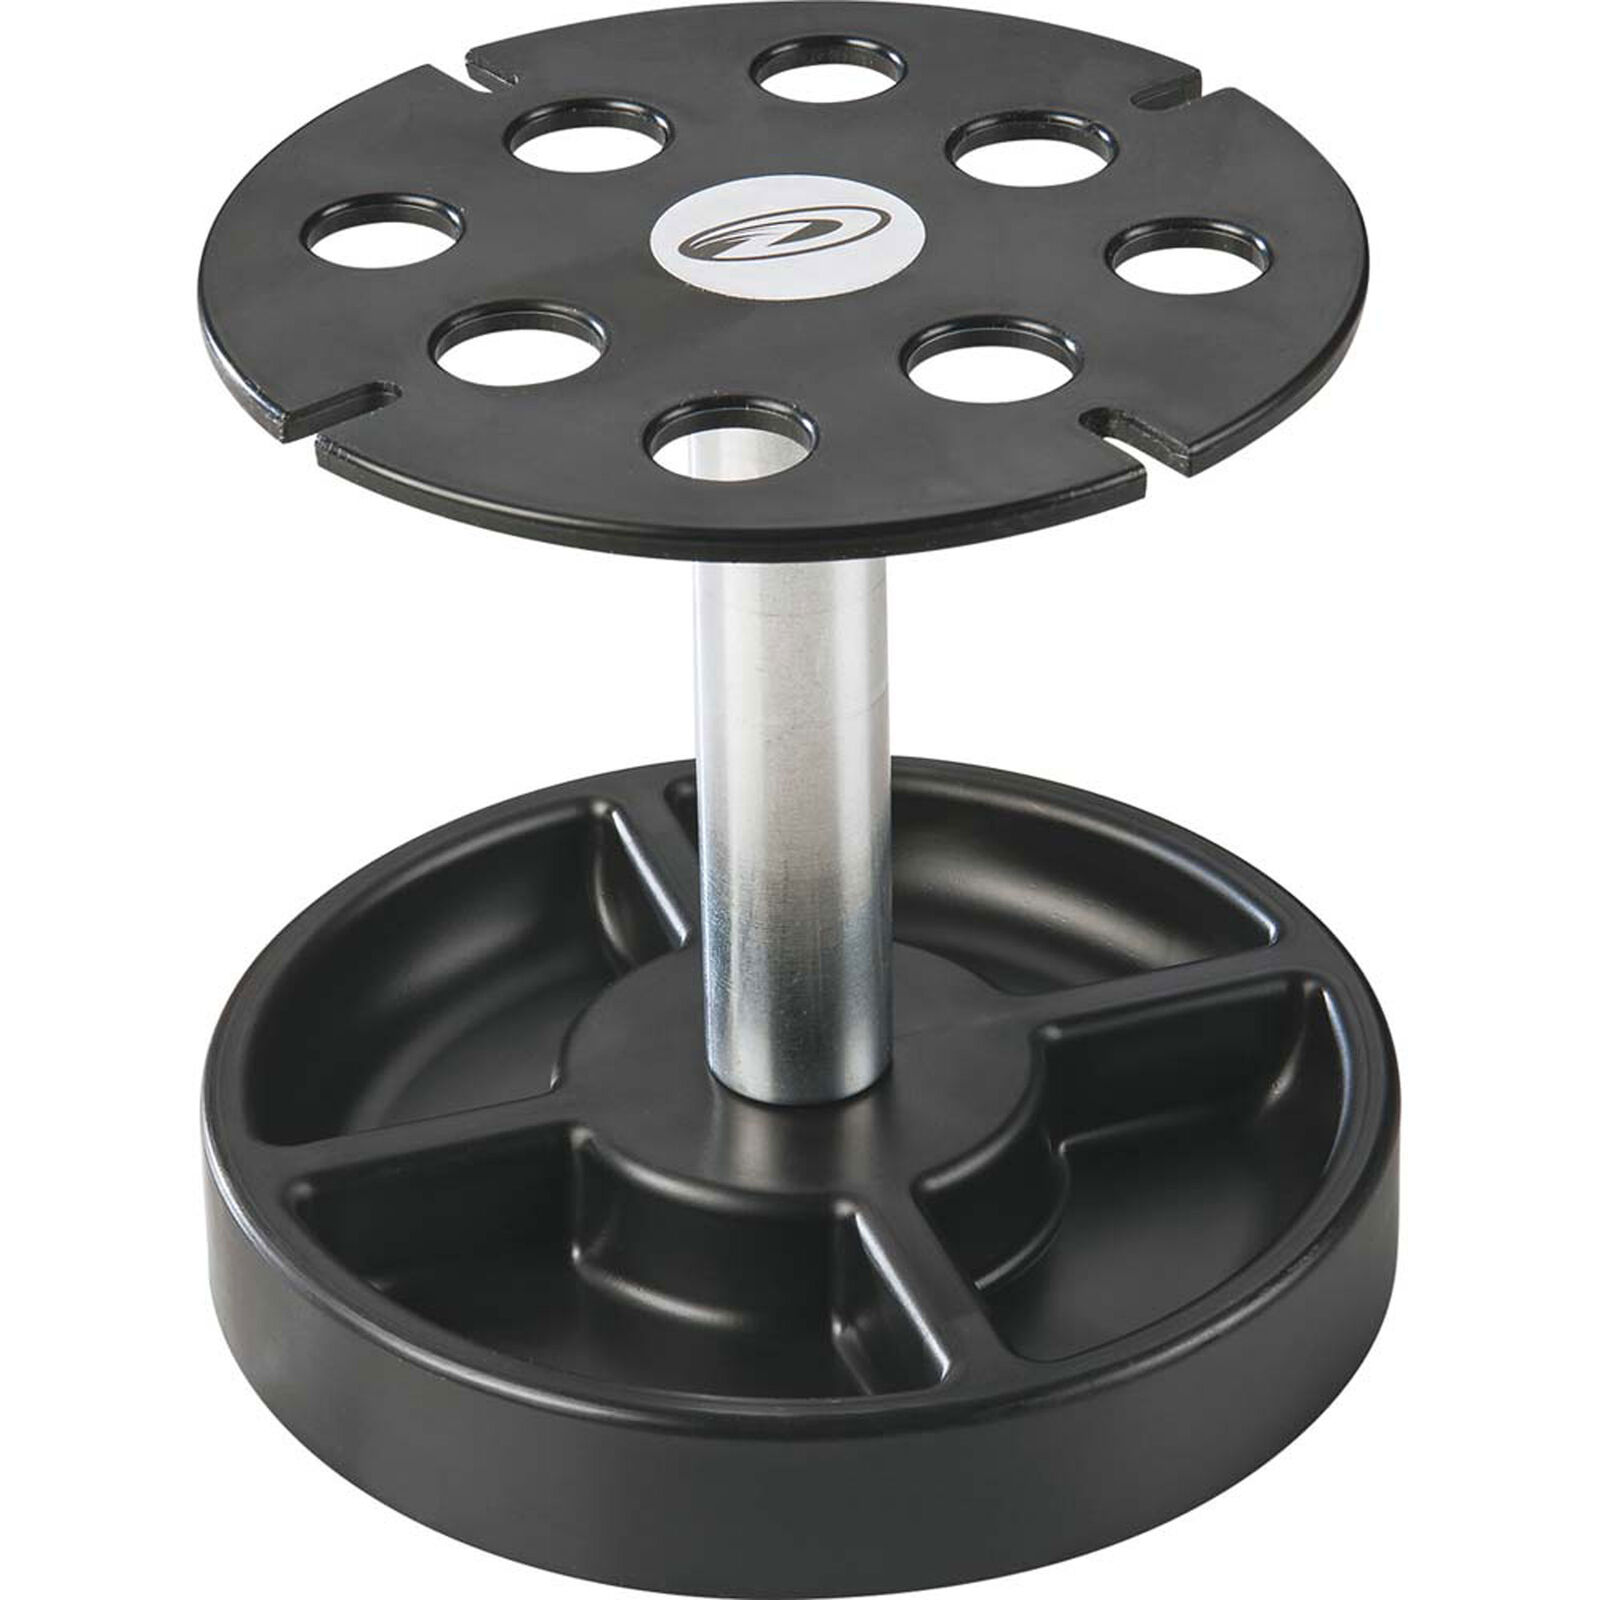 Pit Tech Deluxe Shock Stand, Black